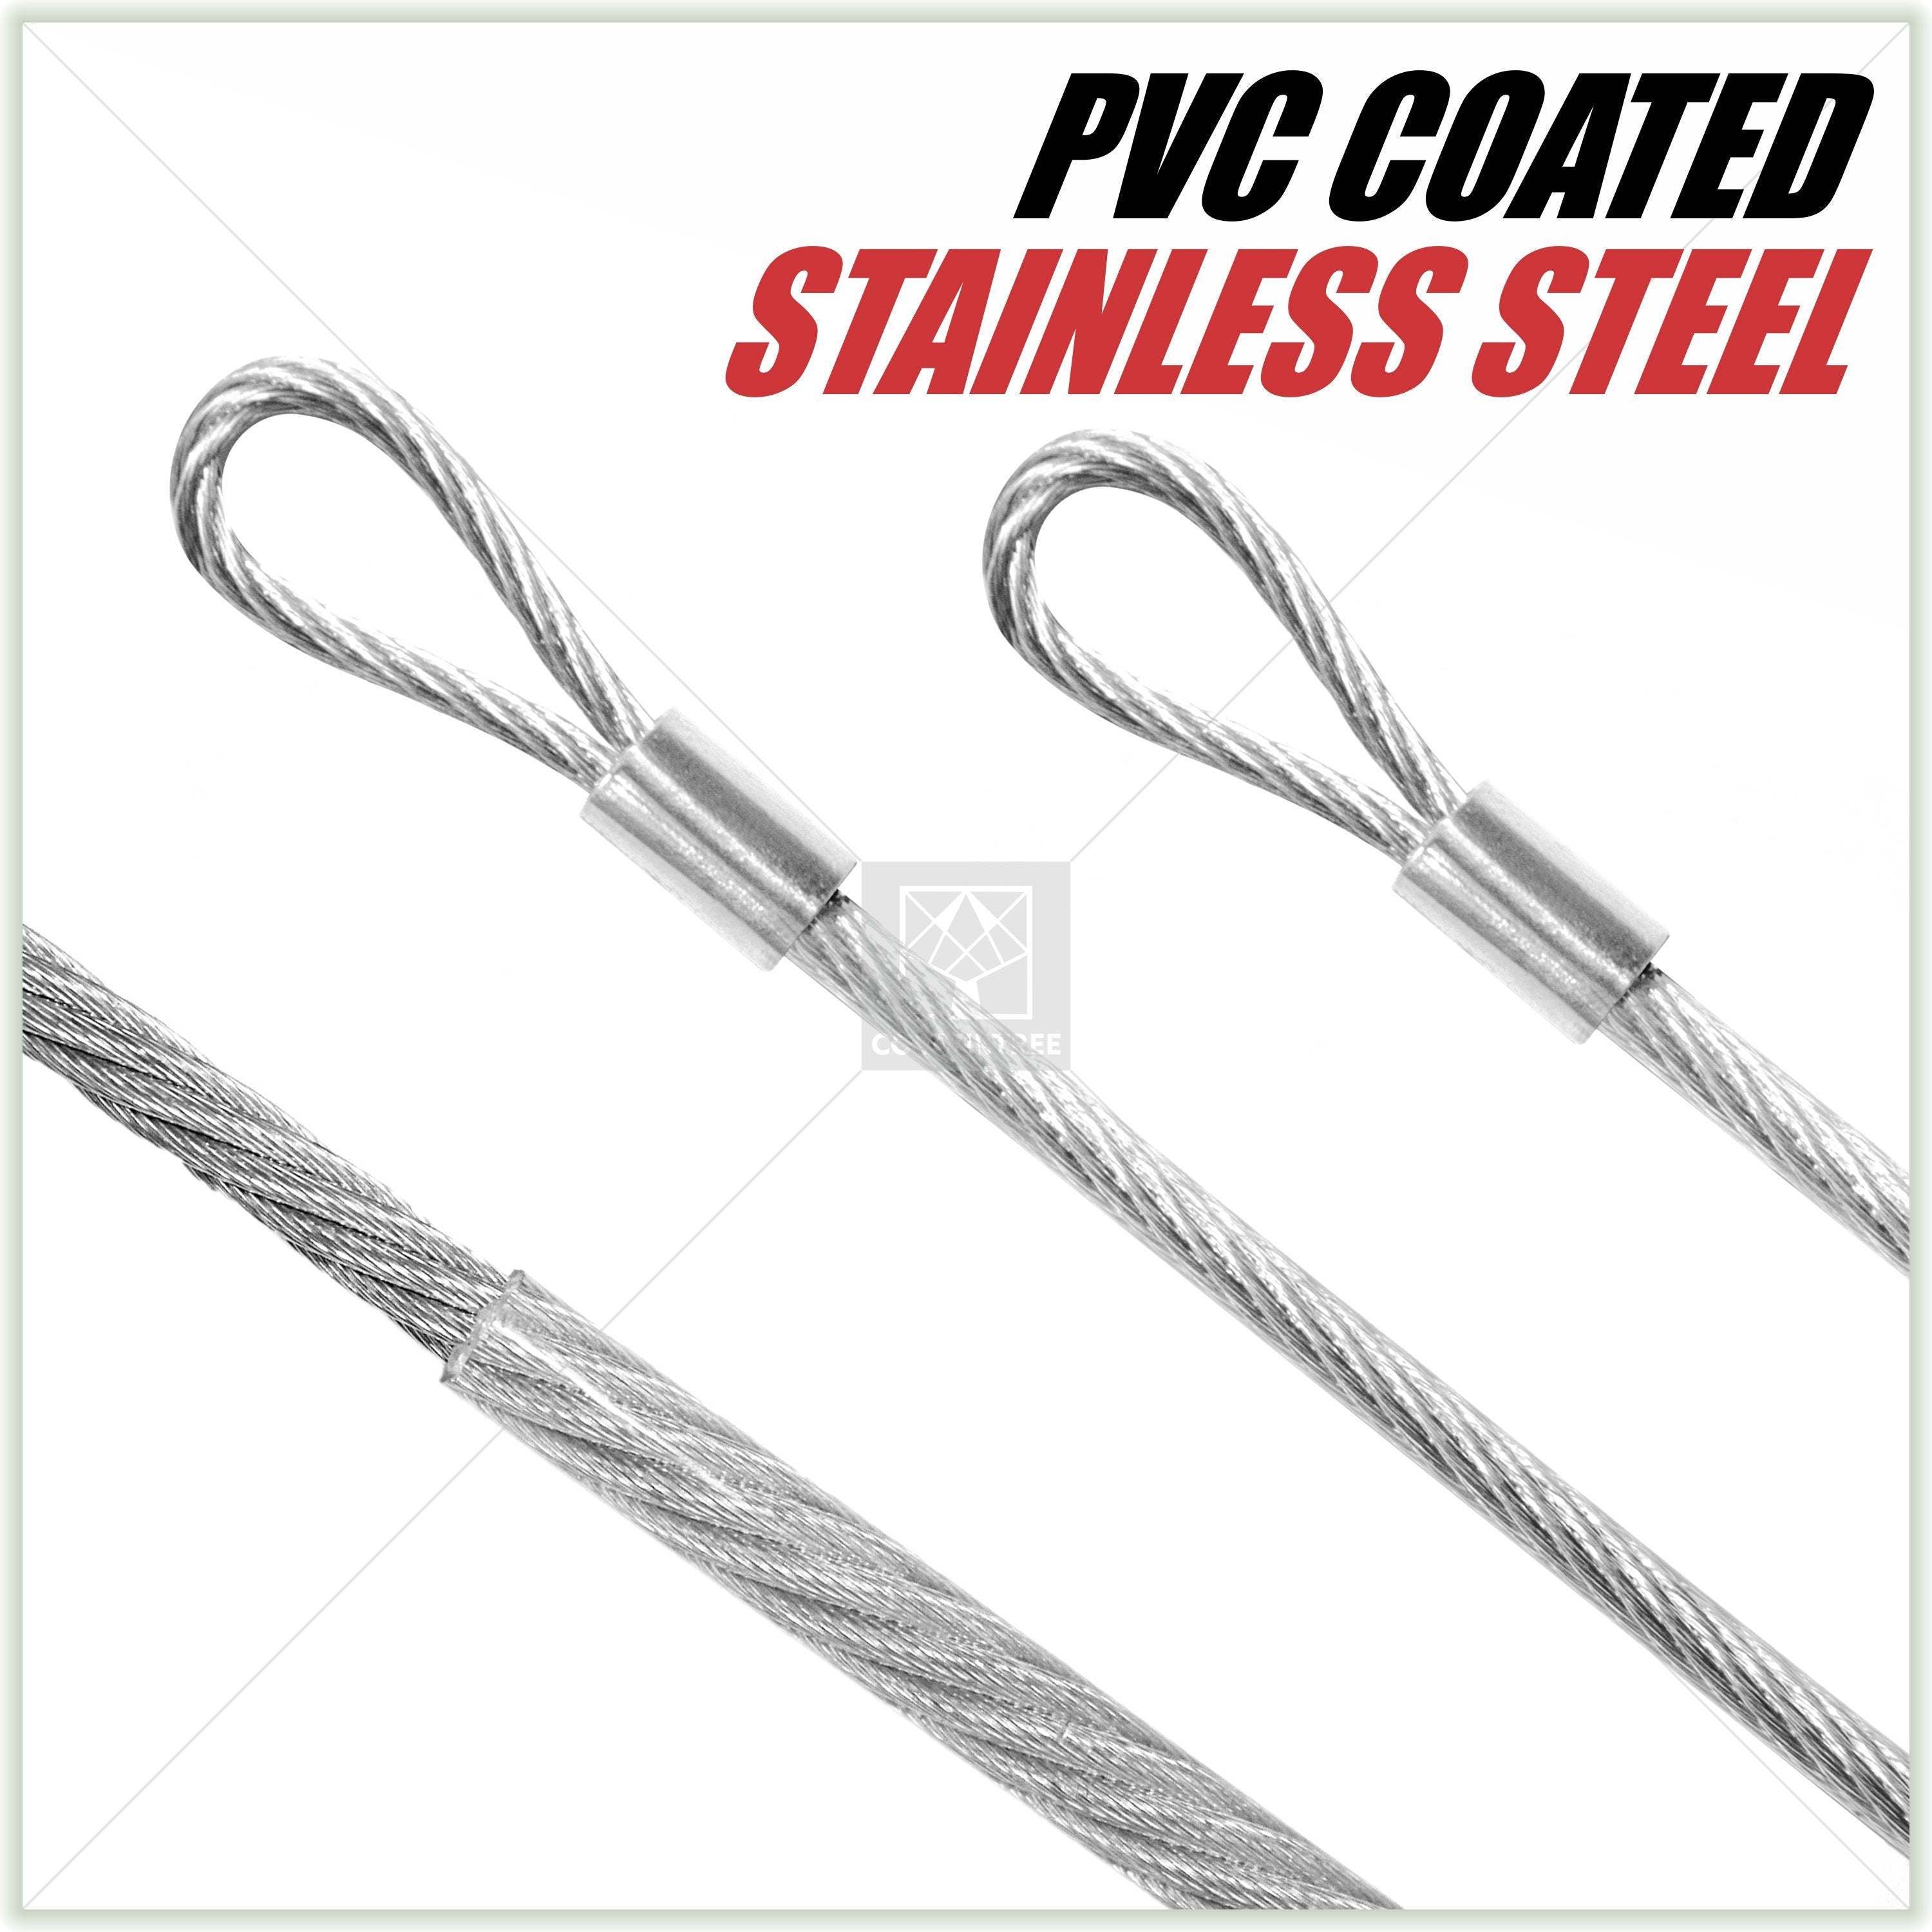 48 Feet (12ft x 4) PVC Coated Stainless Steel Metal Wire Cable Ropes Hardware Kits For Square and Reactangle Sun Shade Sail Canopy â€? Commercial Standard Heavy Duty - ColourTree